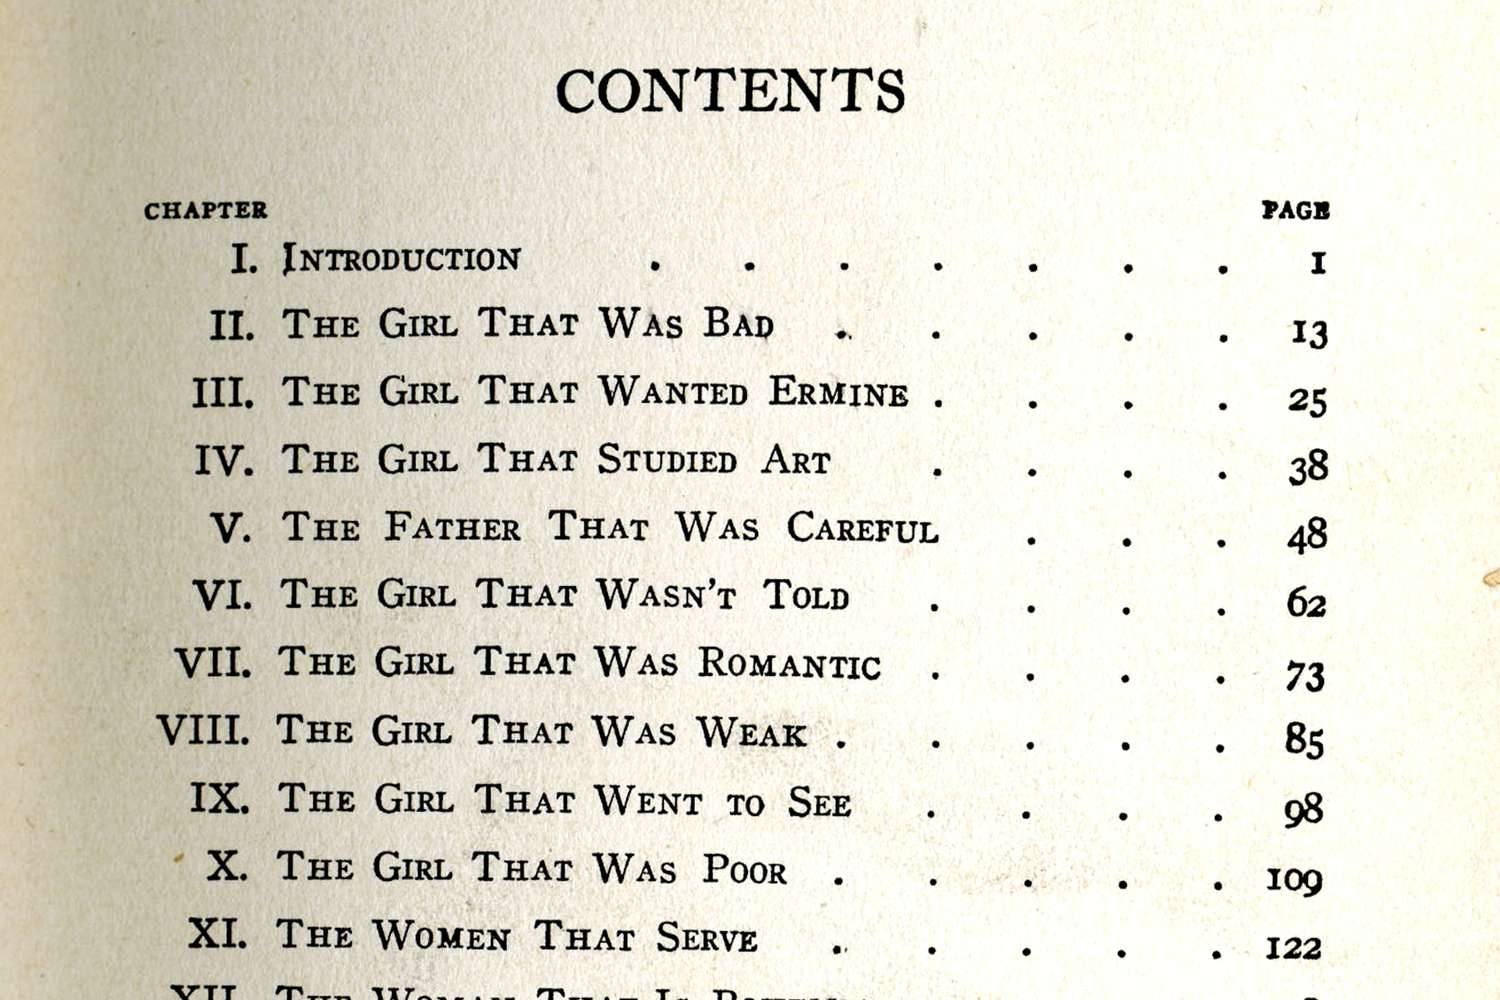 The table of contents from "The Girl That Goes Wrong," by Reginald Wright Kauffman, product very evenly spaced periods